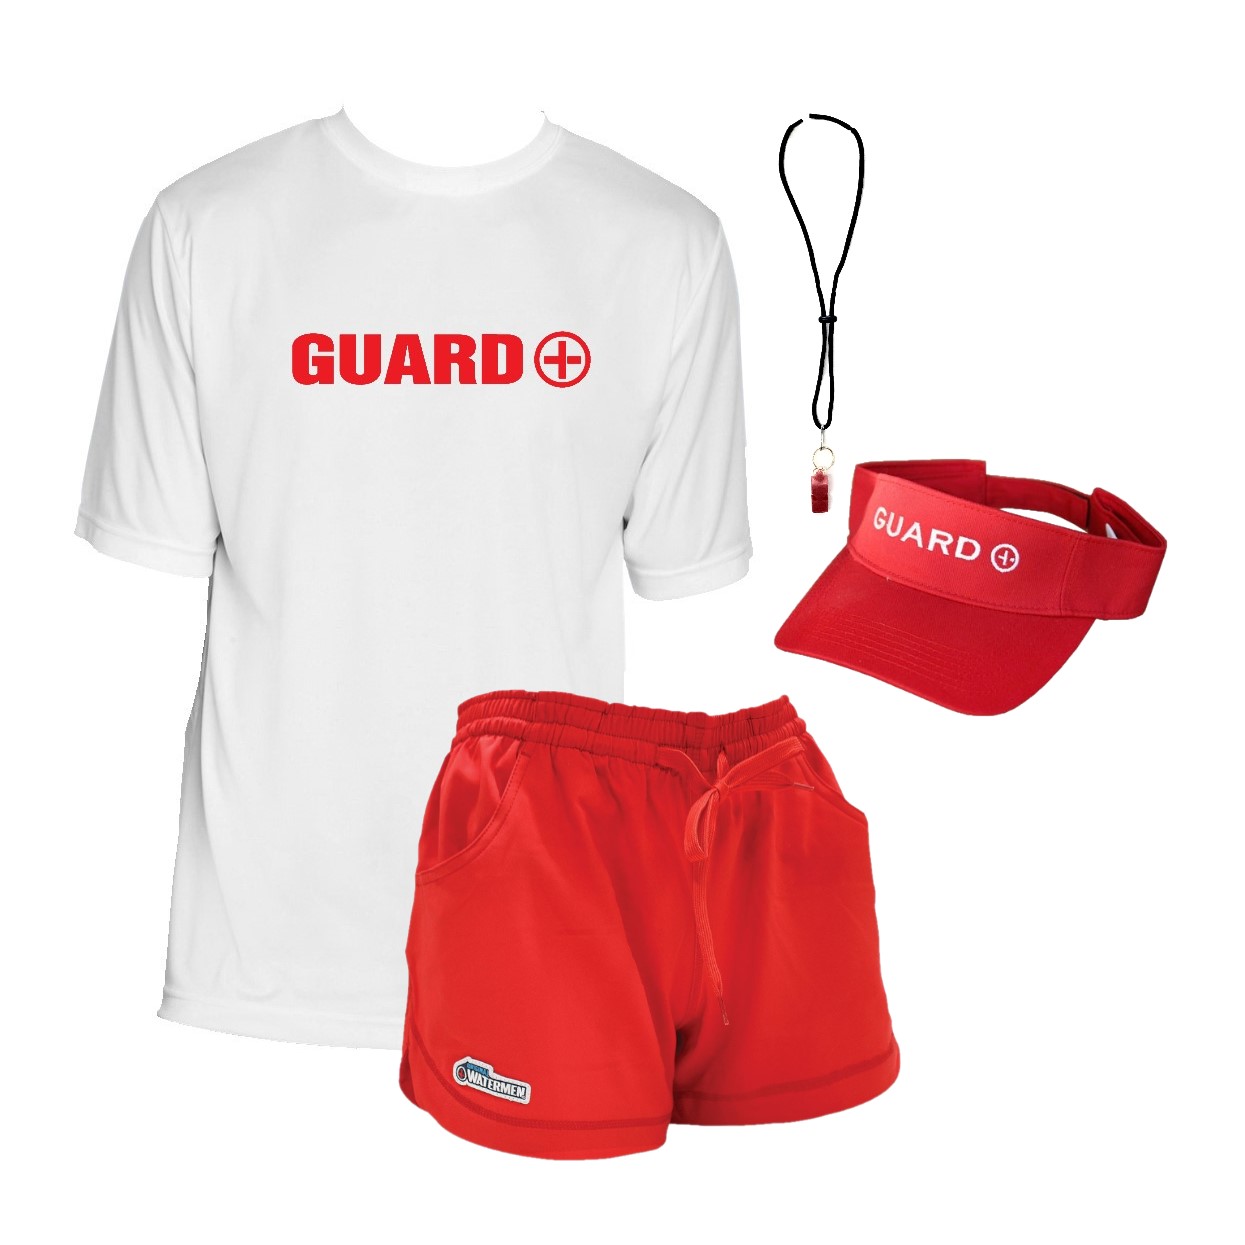 Lifeguard clothing- how to dress the part